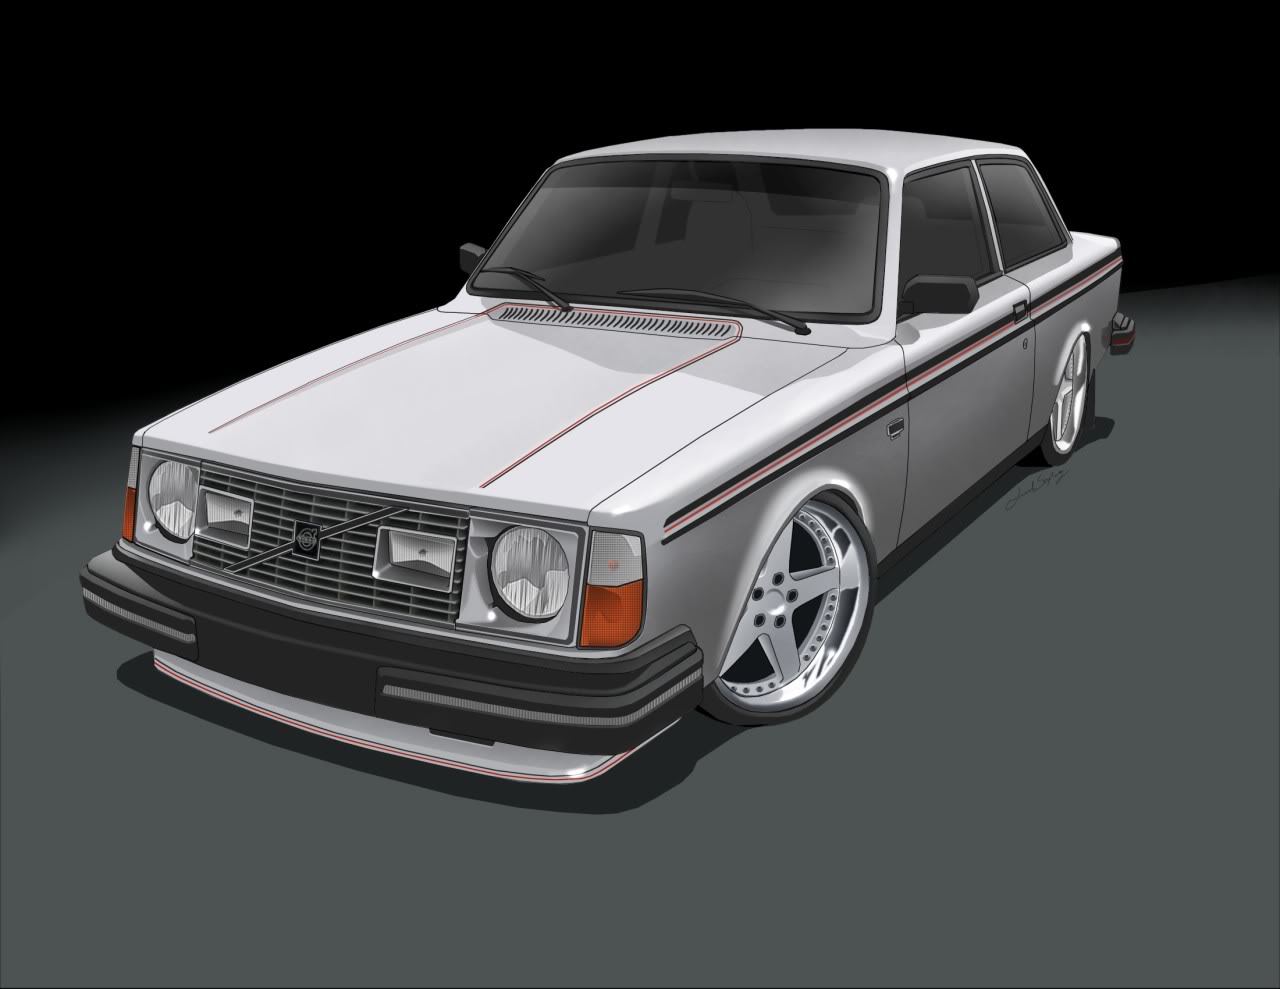 Re: [242Turbo] Volvo 242 Turbo worklog - FINAL RELEASE DOWNLOAD LINK HERE!